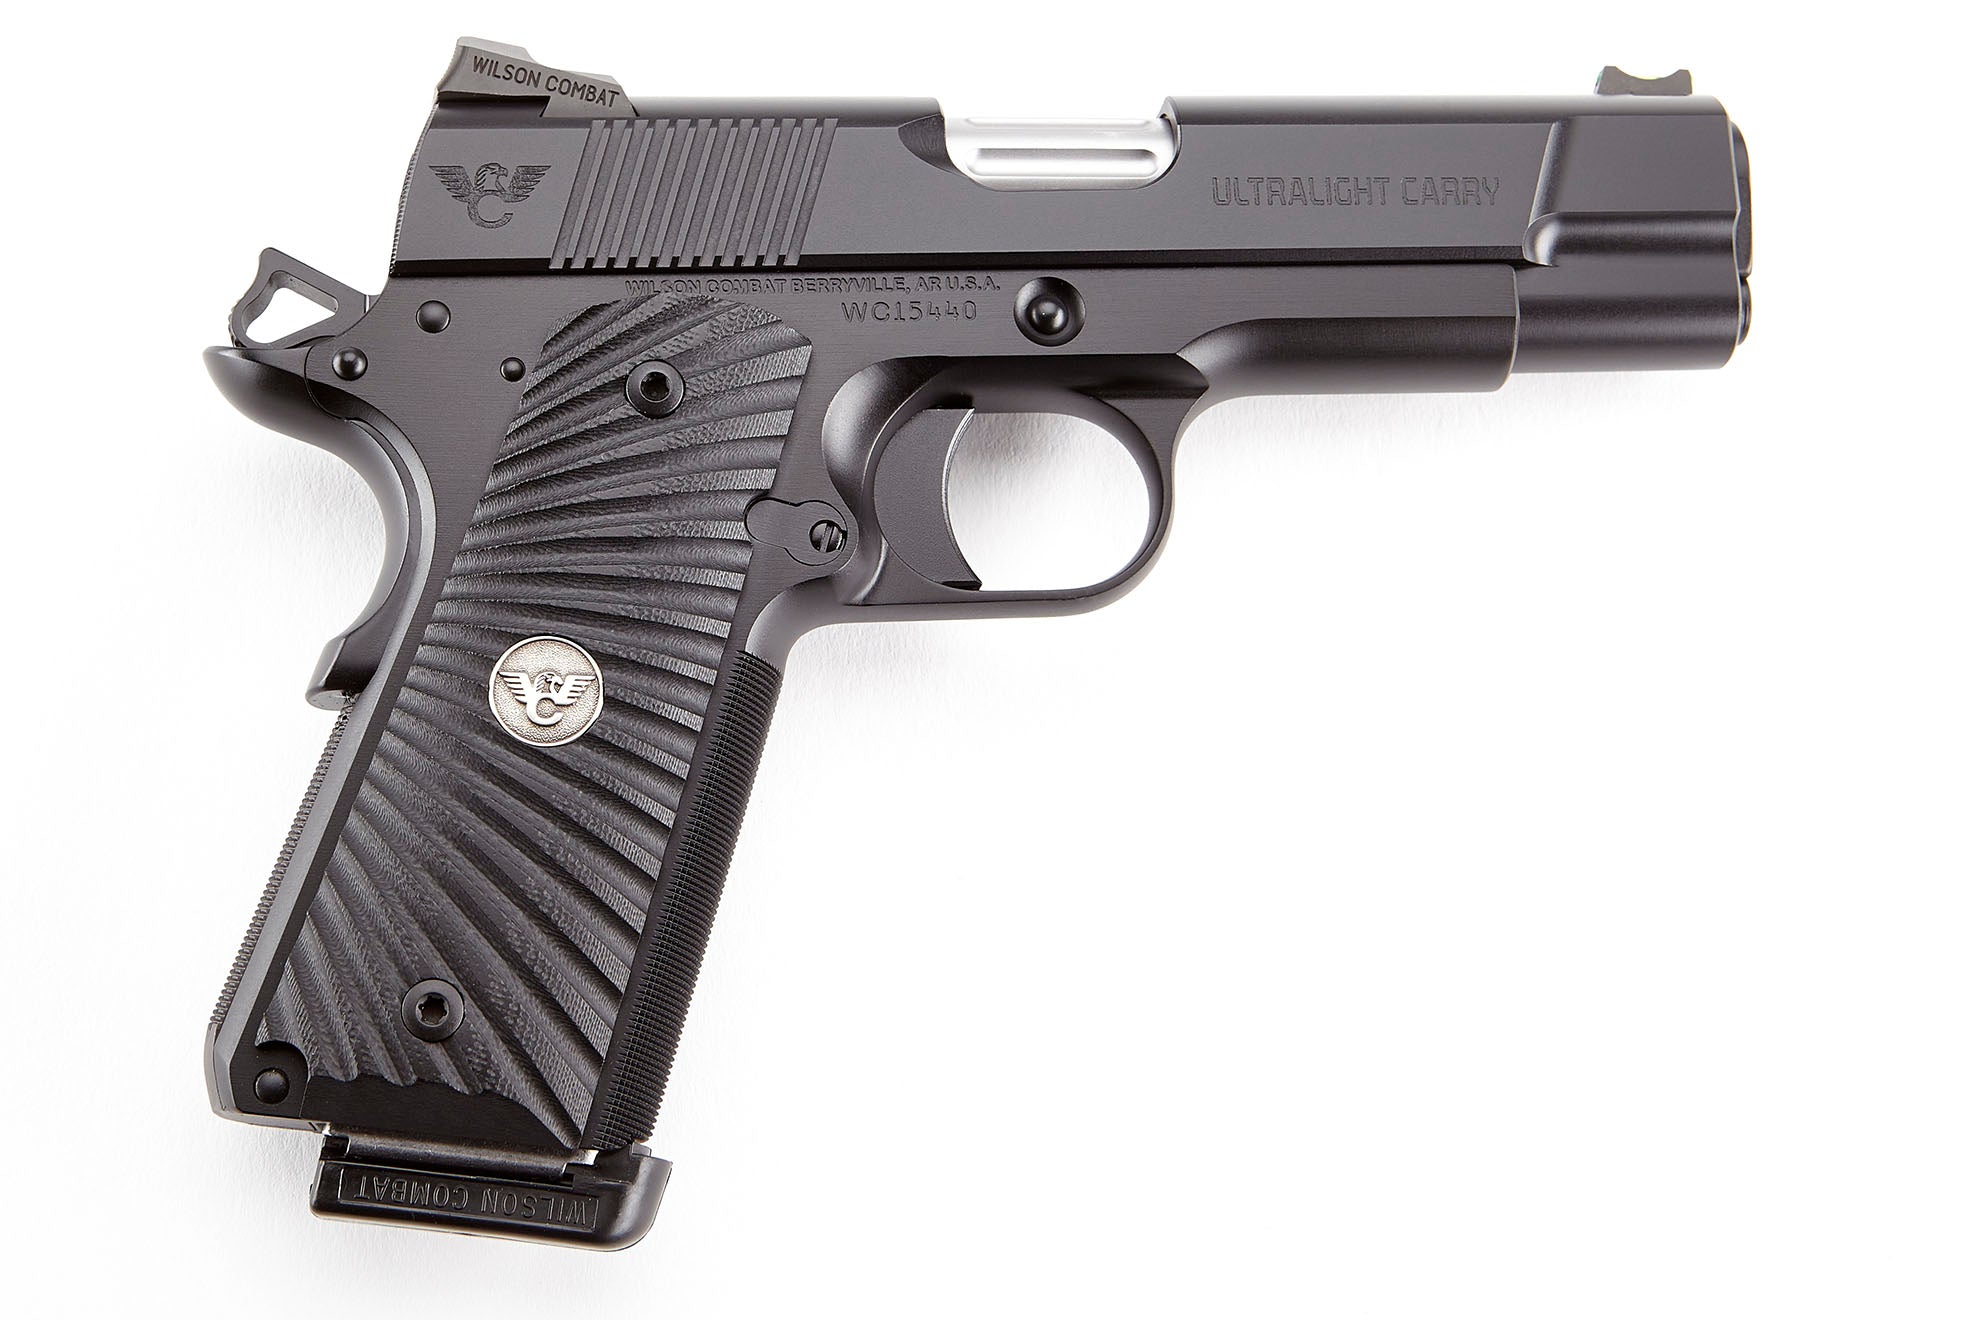 Wilson Combat ULC Commander Review: Pros and cons of the ULC Commander